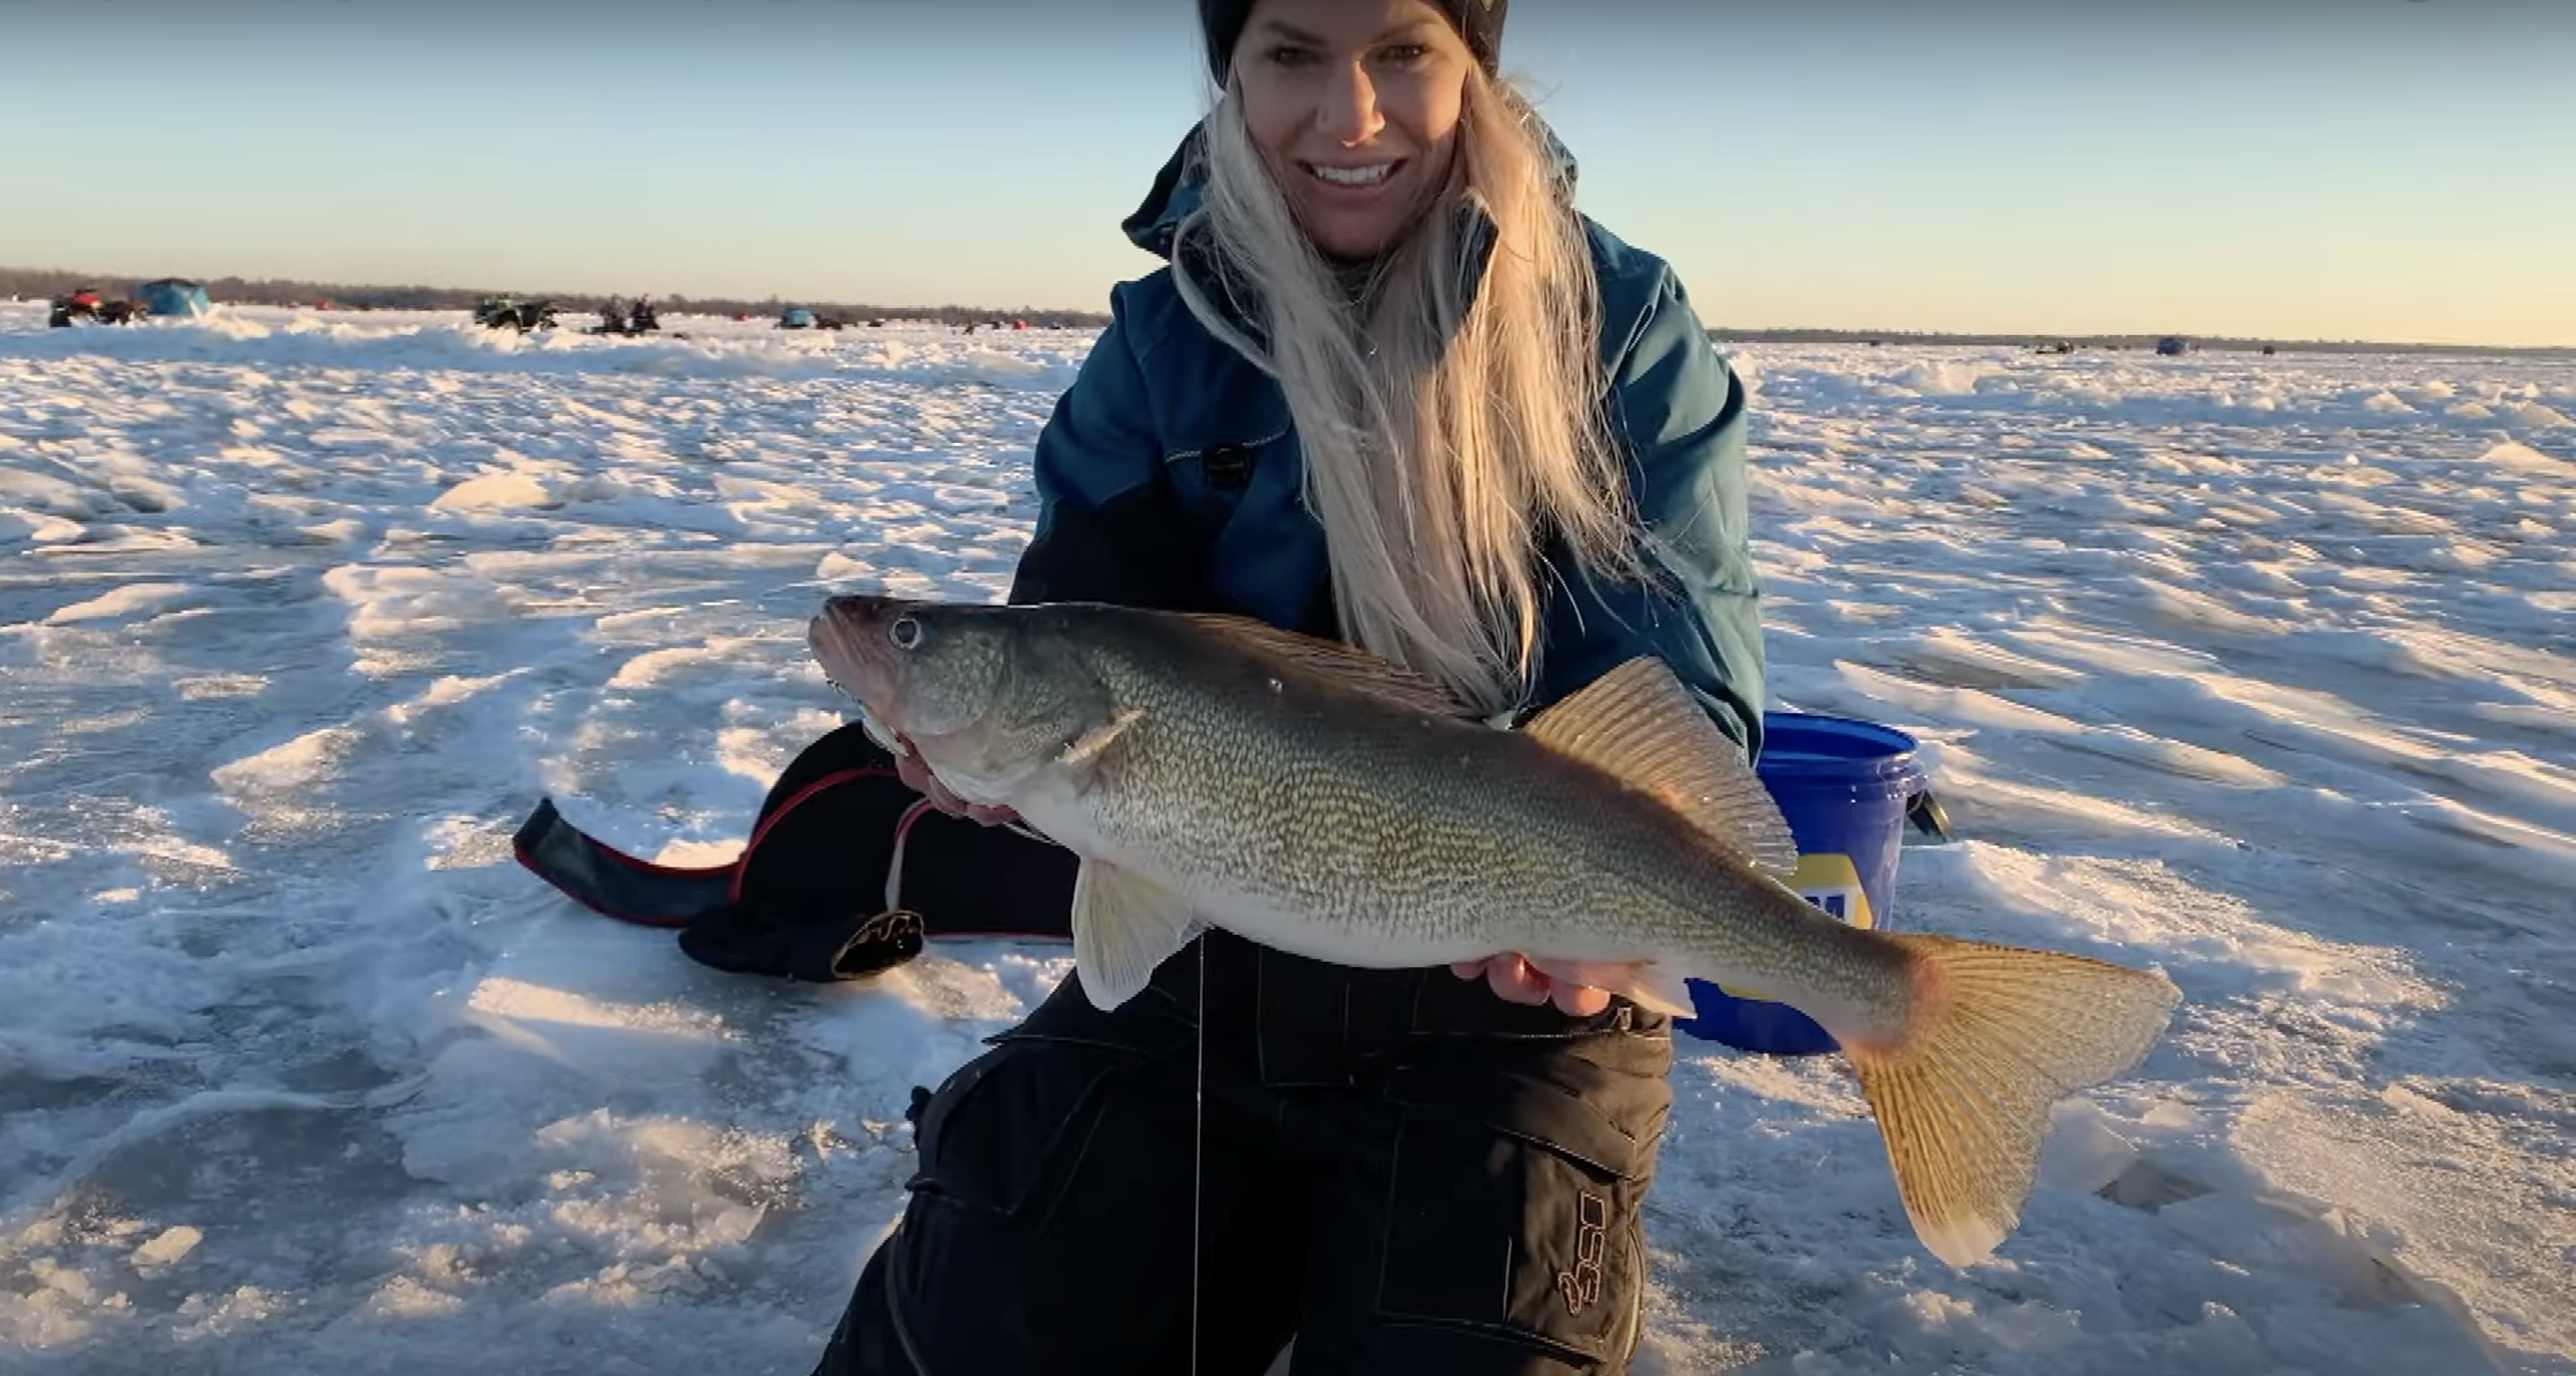 Popularity of Ice Fishing Increases